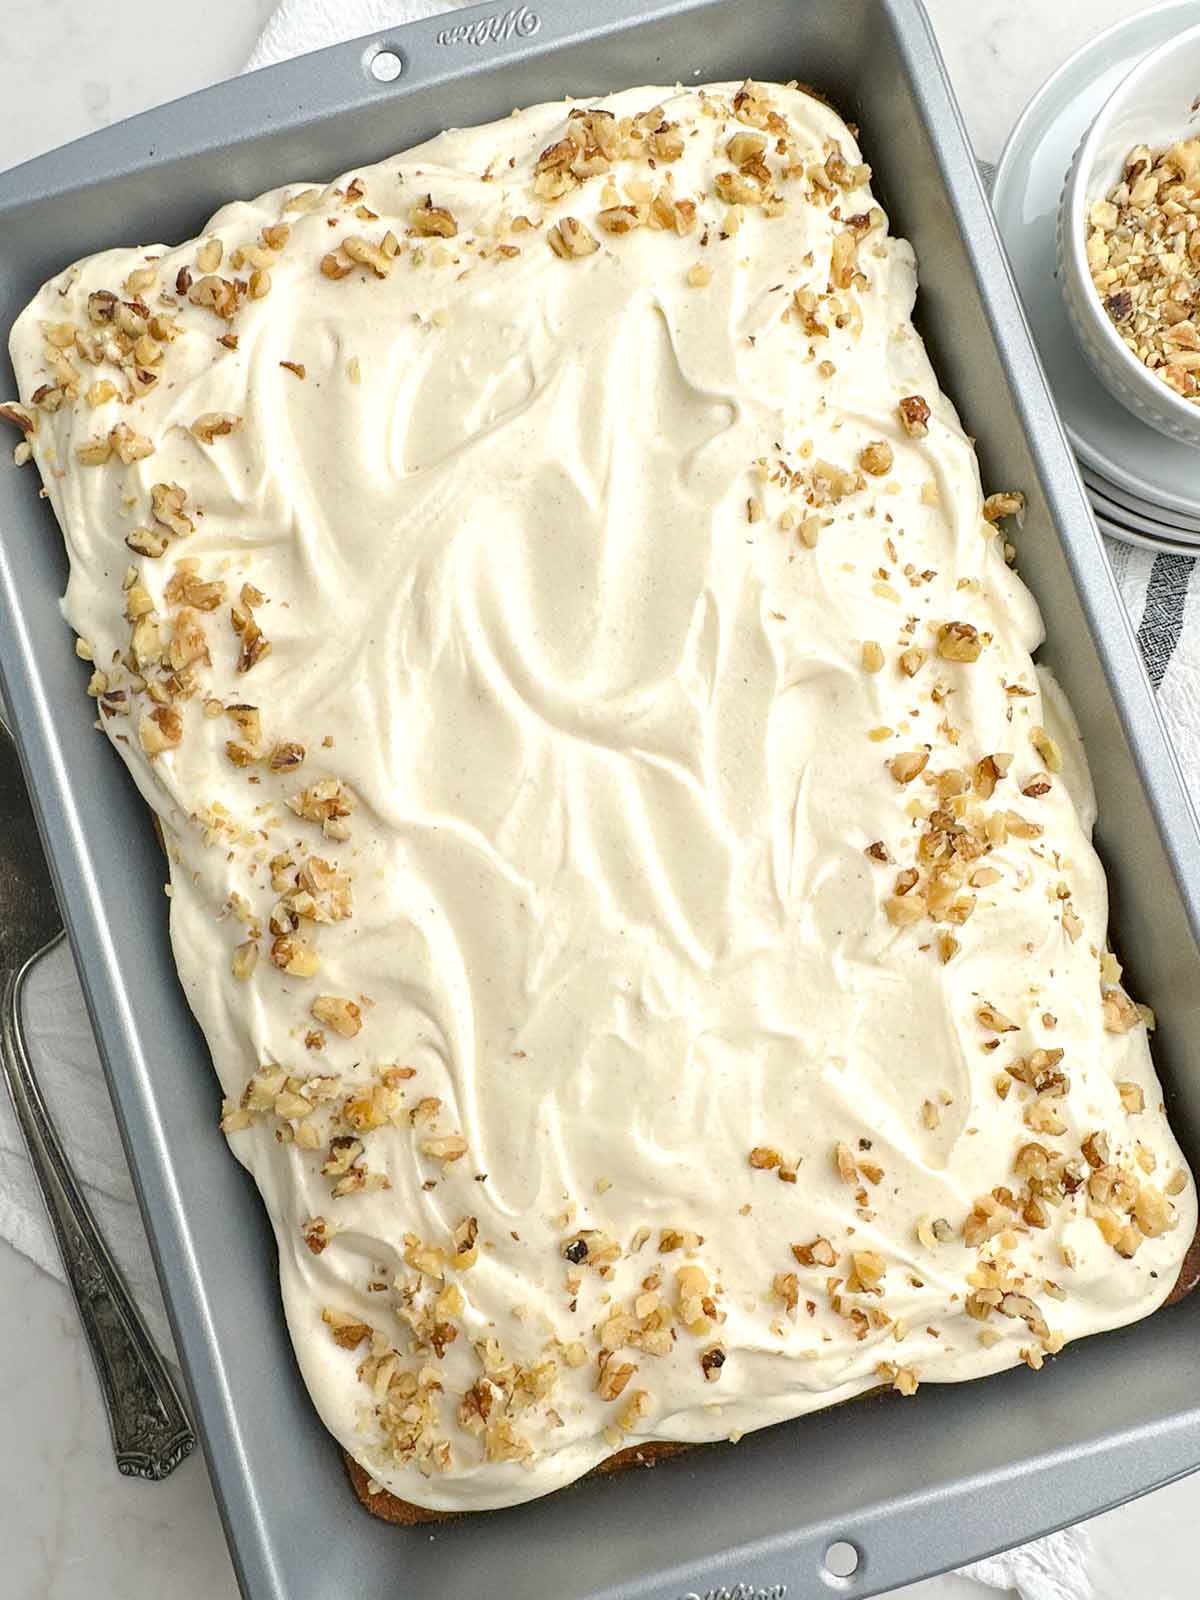 pumpkin bars with cream cheese frosting and chopped walnuts on top